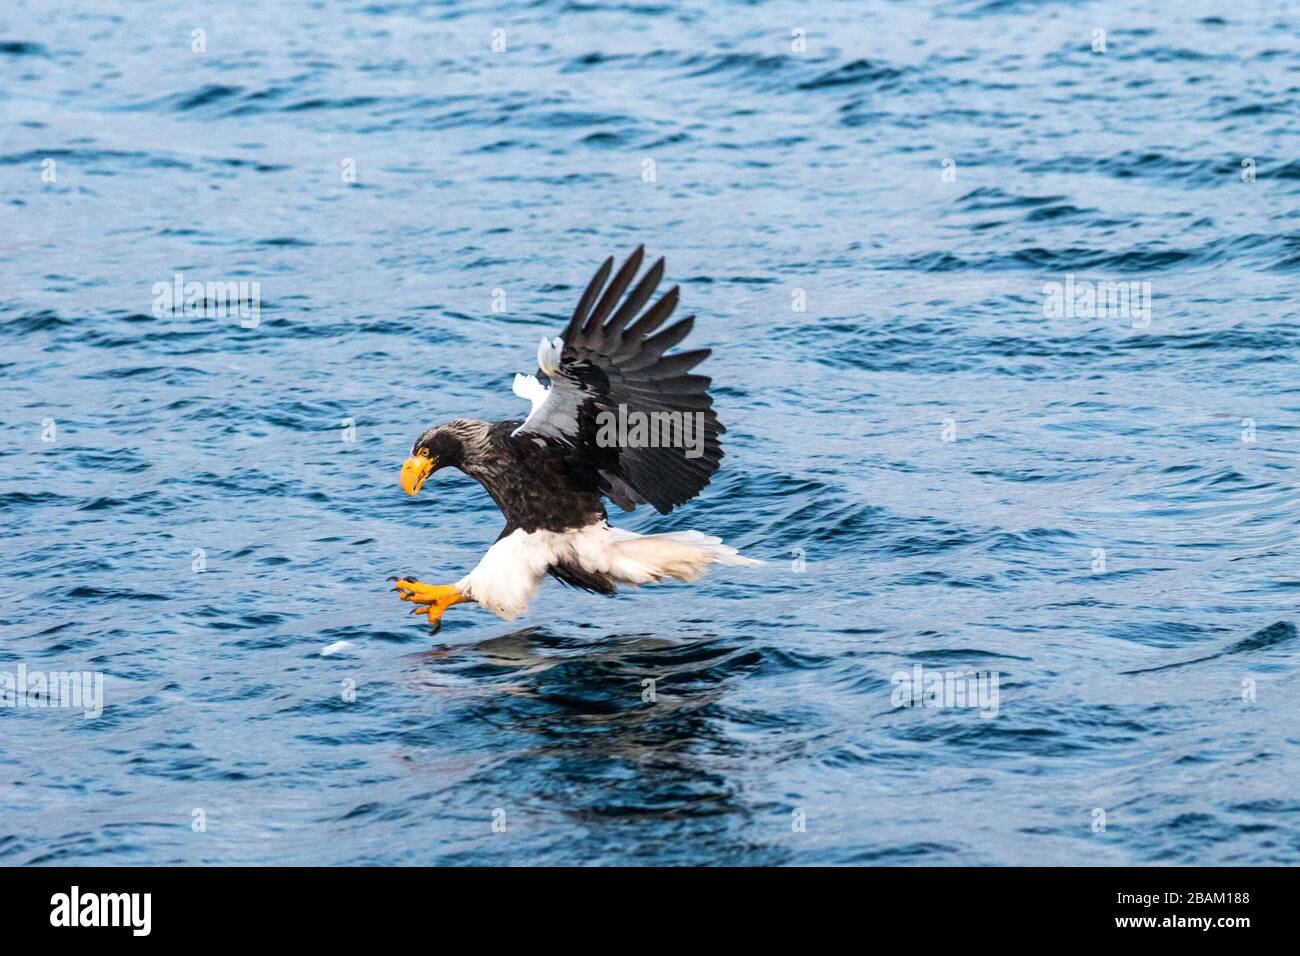 Steller's sea eagle in flight hunting fish from sea at sunrise,Hokkaido, Japan, majestic sea eagle with big claws aiming to catch fish from water surf Stock Photo